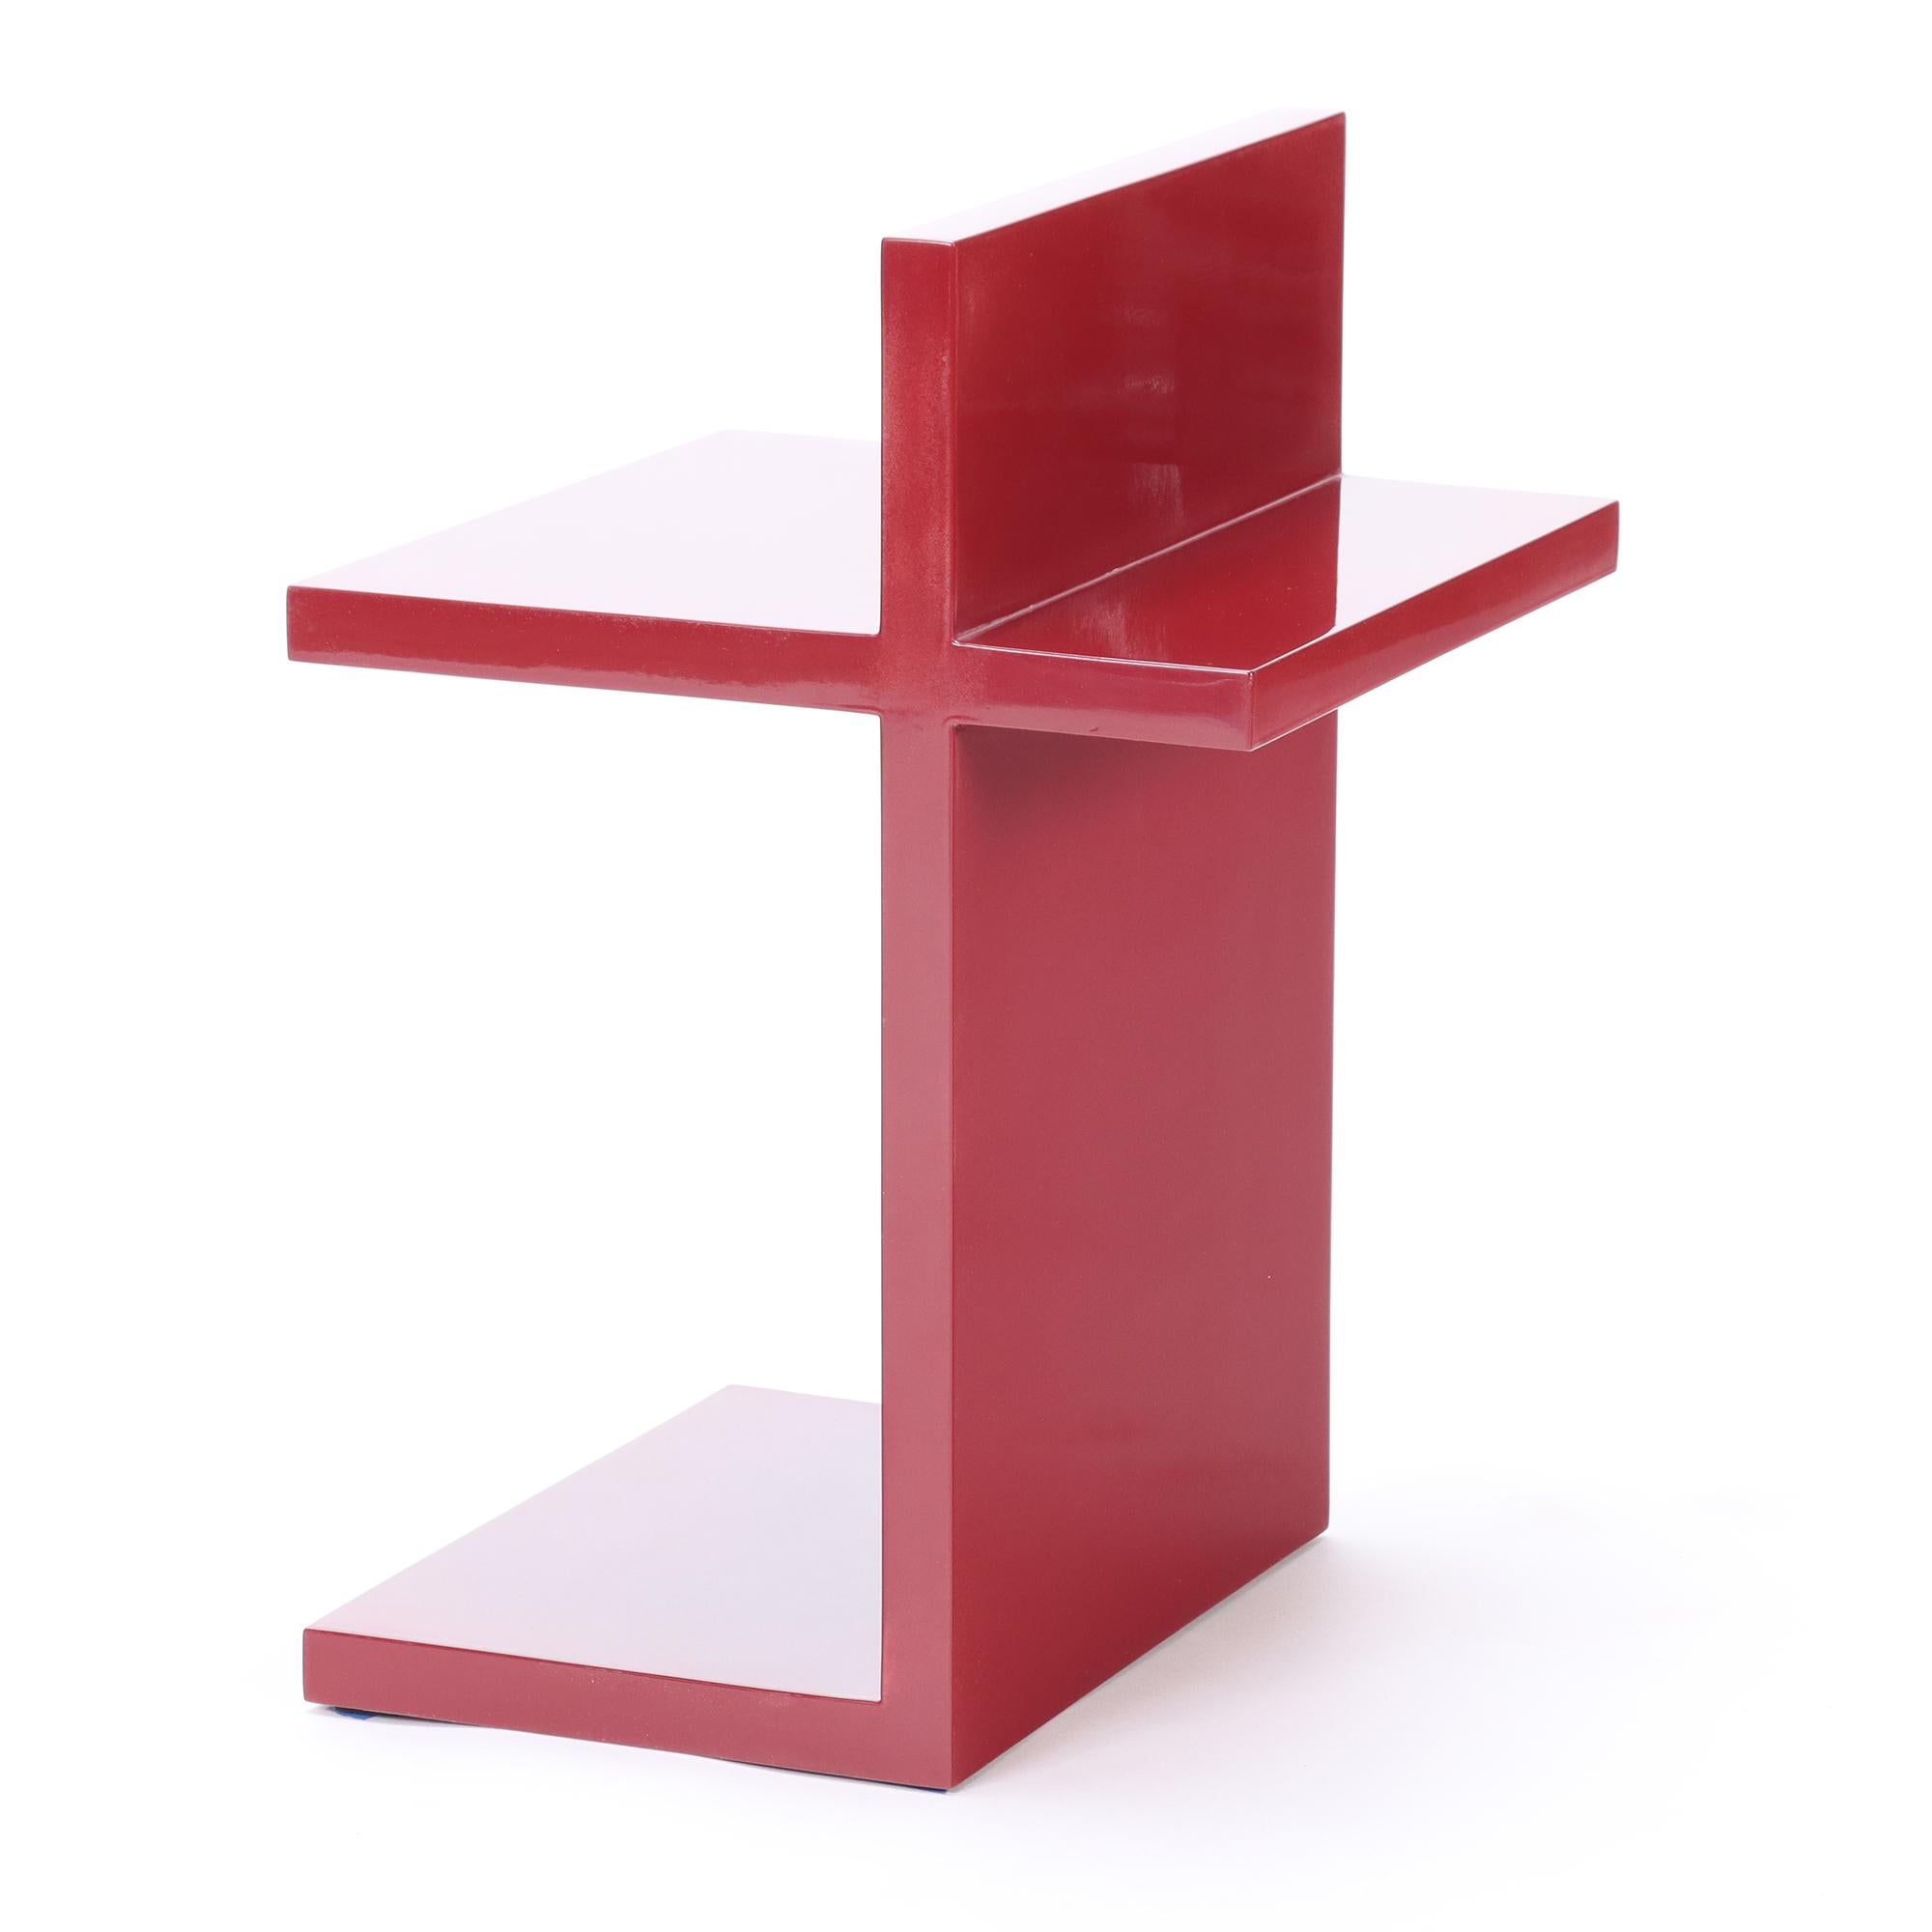 Designed by Maximilian Eicke for his brand Max ID NY.

These minimalistic side tables are made from Solid teak with high gloss lacquered Red finish.

Designed as part of its original collection in 2010, the designer being a tea lover (not a coffee